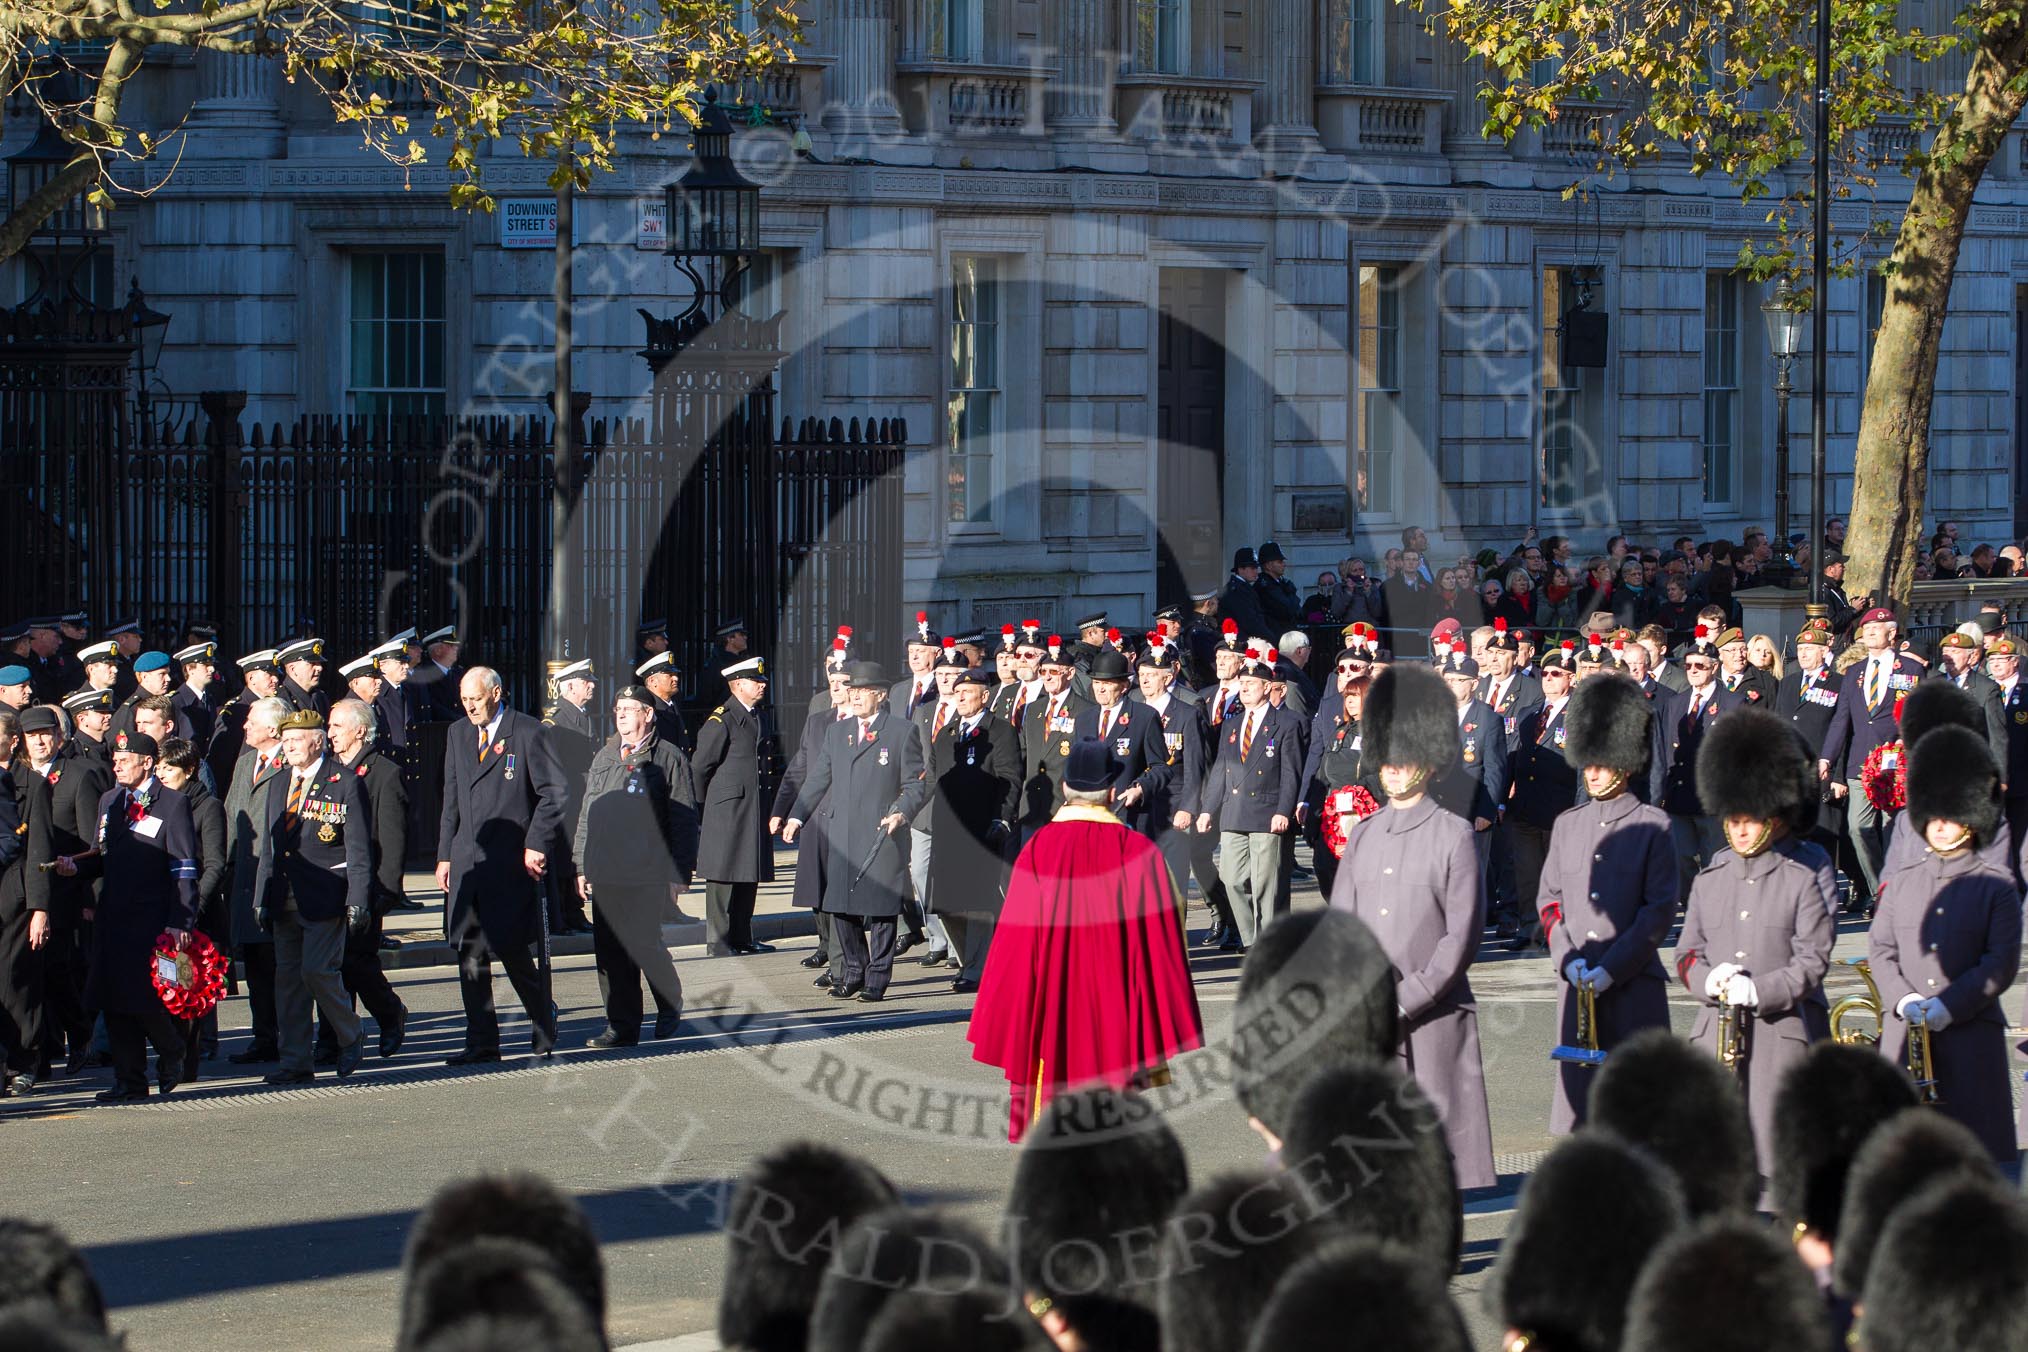 Remembrance Sunday 2012 Cenotaph March Past: Group A4 - Royal Sussex Regimental Association, A5 - Royal Hampshire Regiment Comrades Association, and A6 - Royal Regiment of Fusiliers..
Whitehall, Cenotaph,
London SW1,

United Kingdom,
on 11 November 2012 at 11:48, image #572